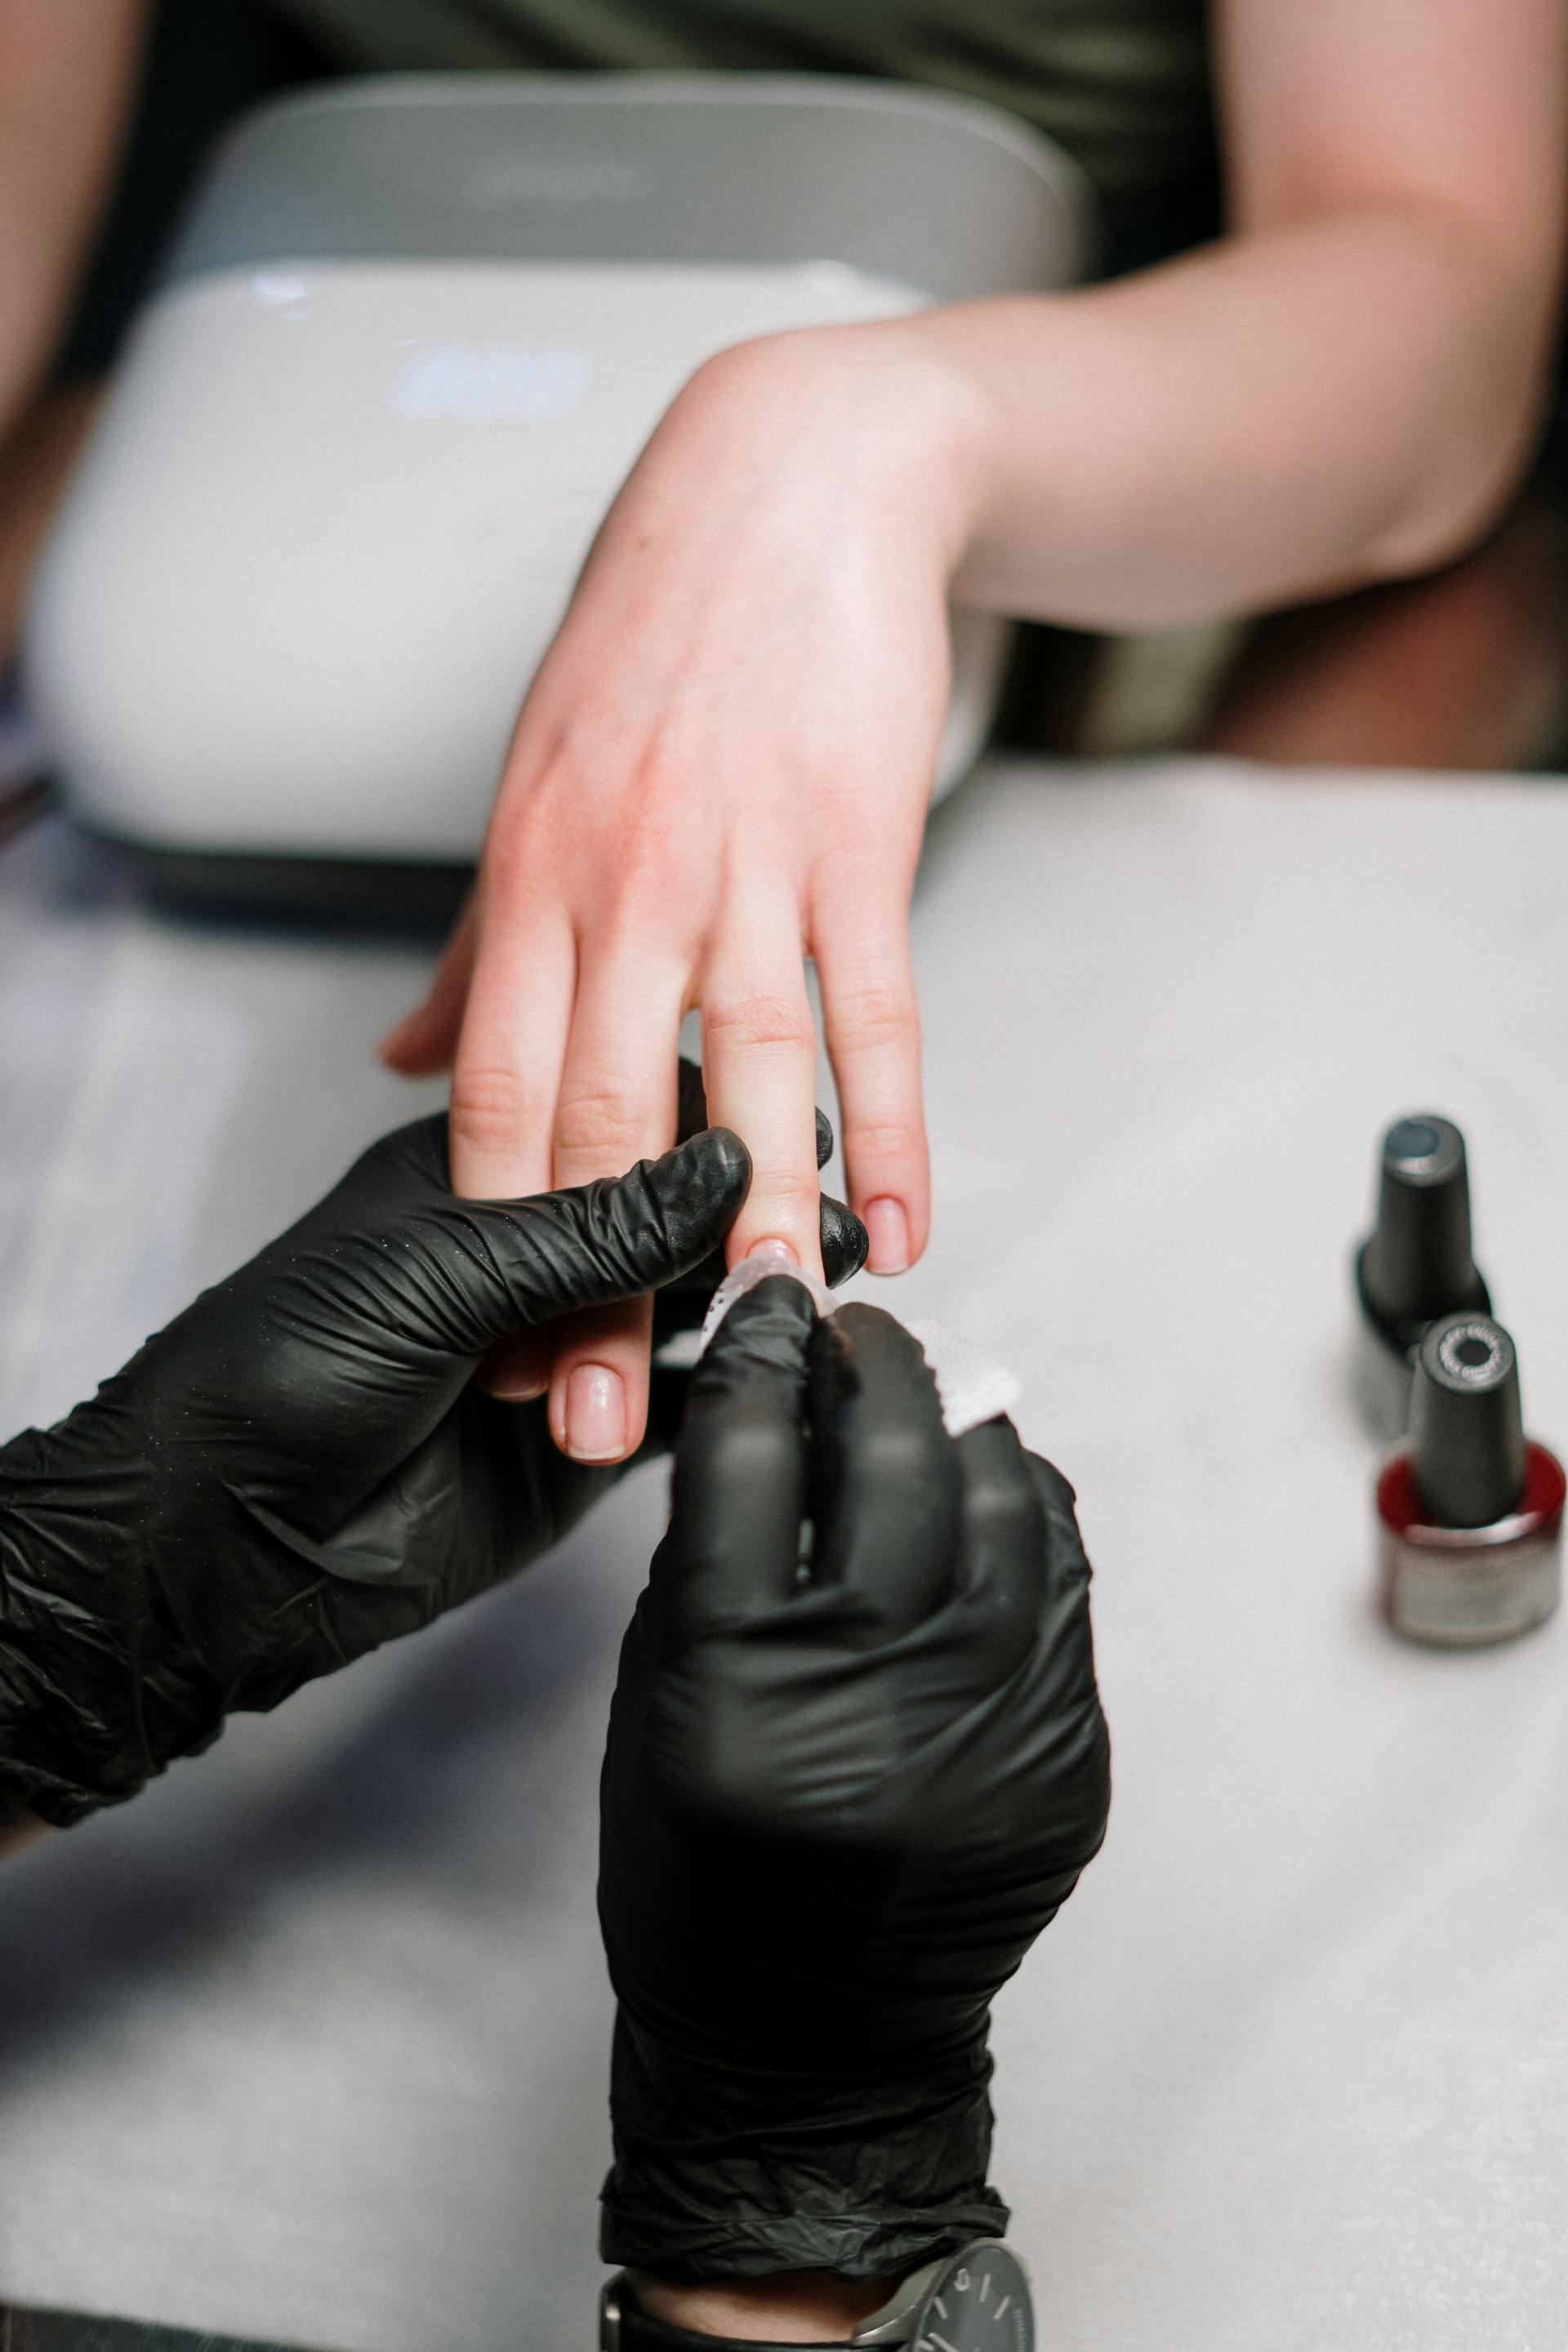 A person getting their nails done | Source: Pexels